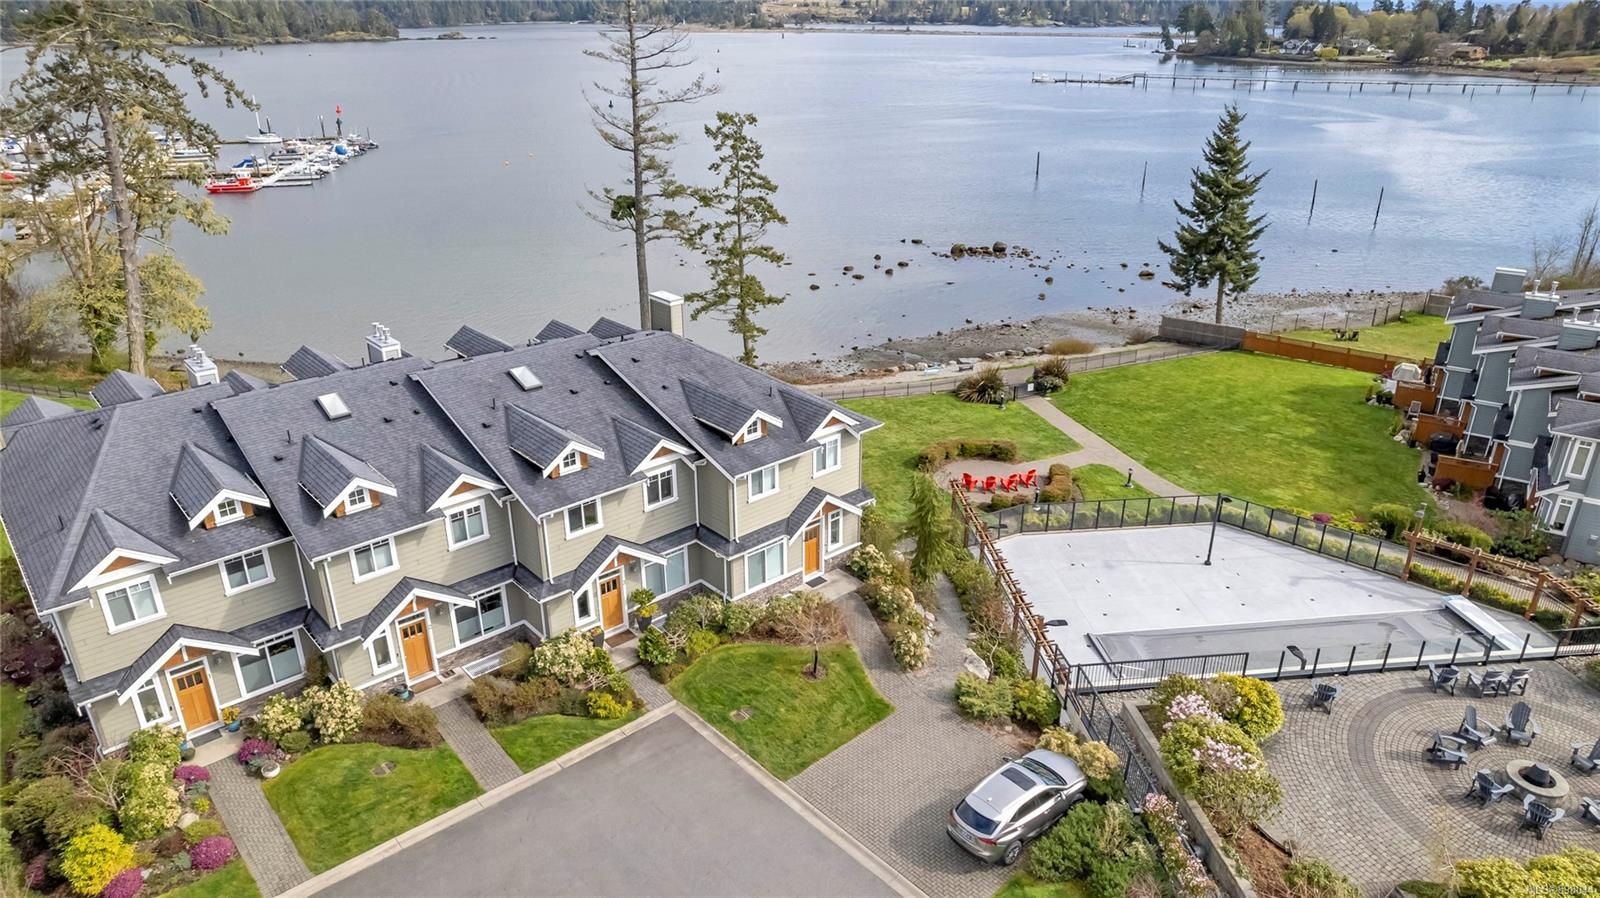 Open House. Open House on Sunday, July 10, 2022 12:00PM - 2:00PM
Oceanfront Sooke Townhouse with 4 bedrooms and 4 bathrooms and all the amenities you can imagine. Open house this Sunday July 3rd from 1-3. $1,199,000.00 and Priced to sell so Come see your 